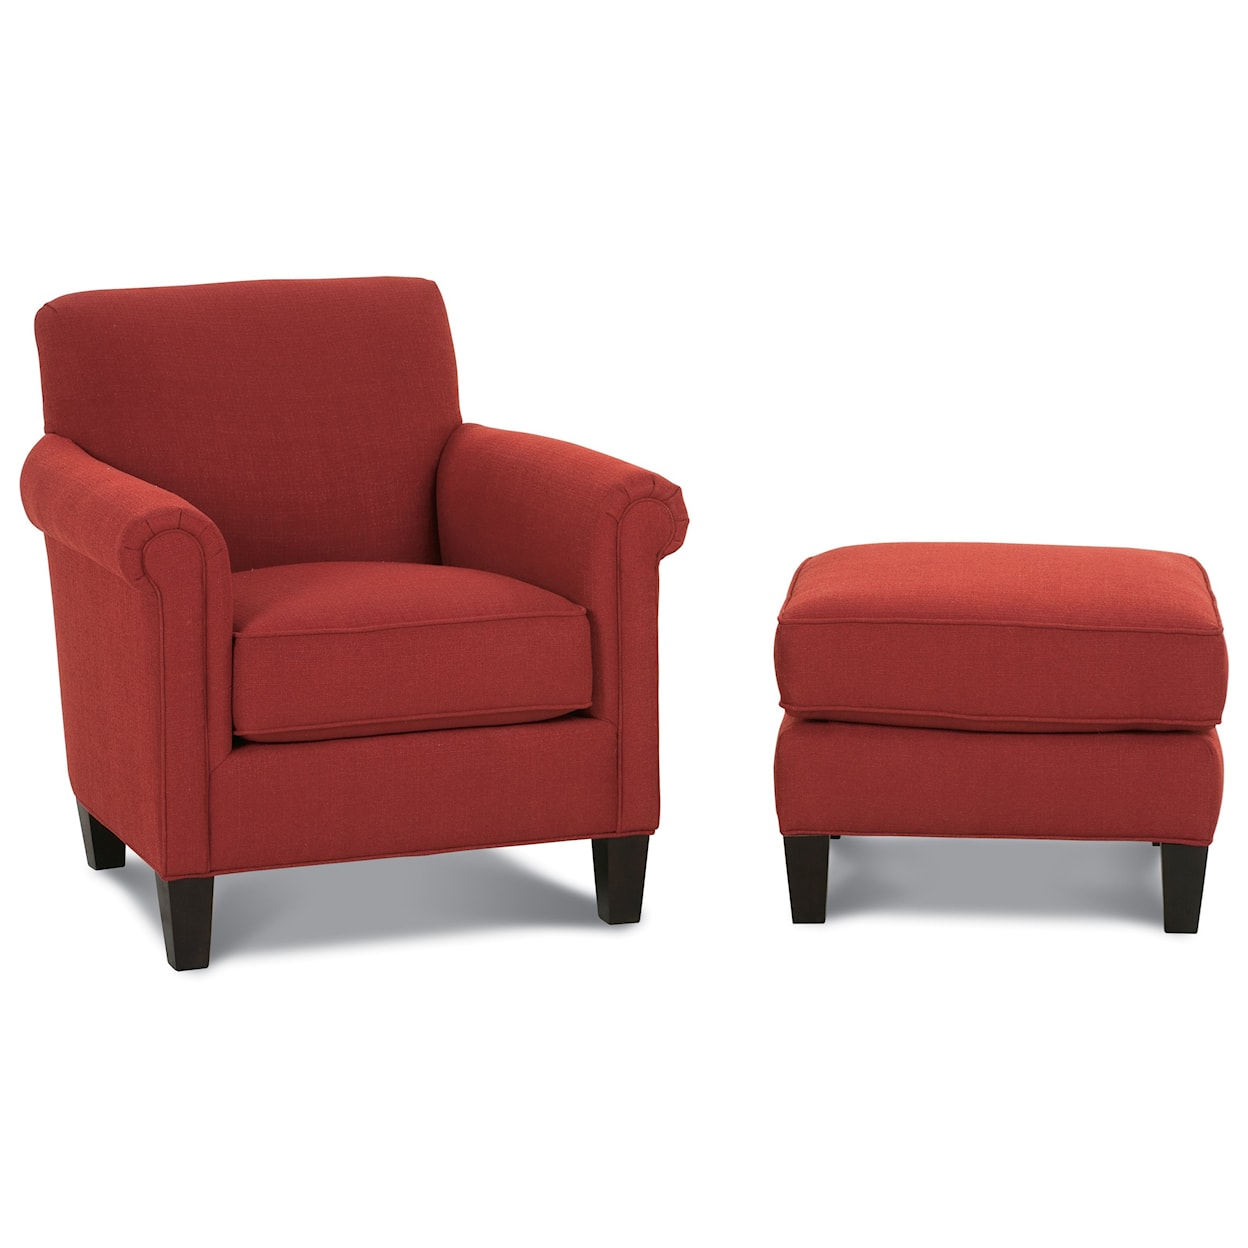 Rowe Chairs and Accents McGuire Arm Chair